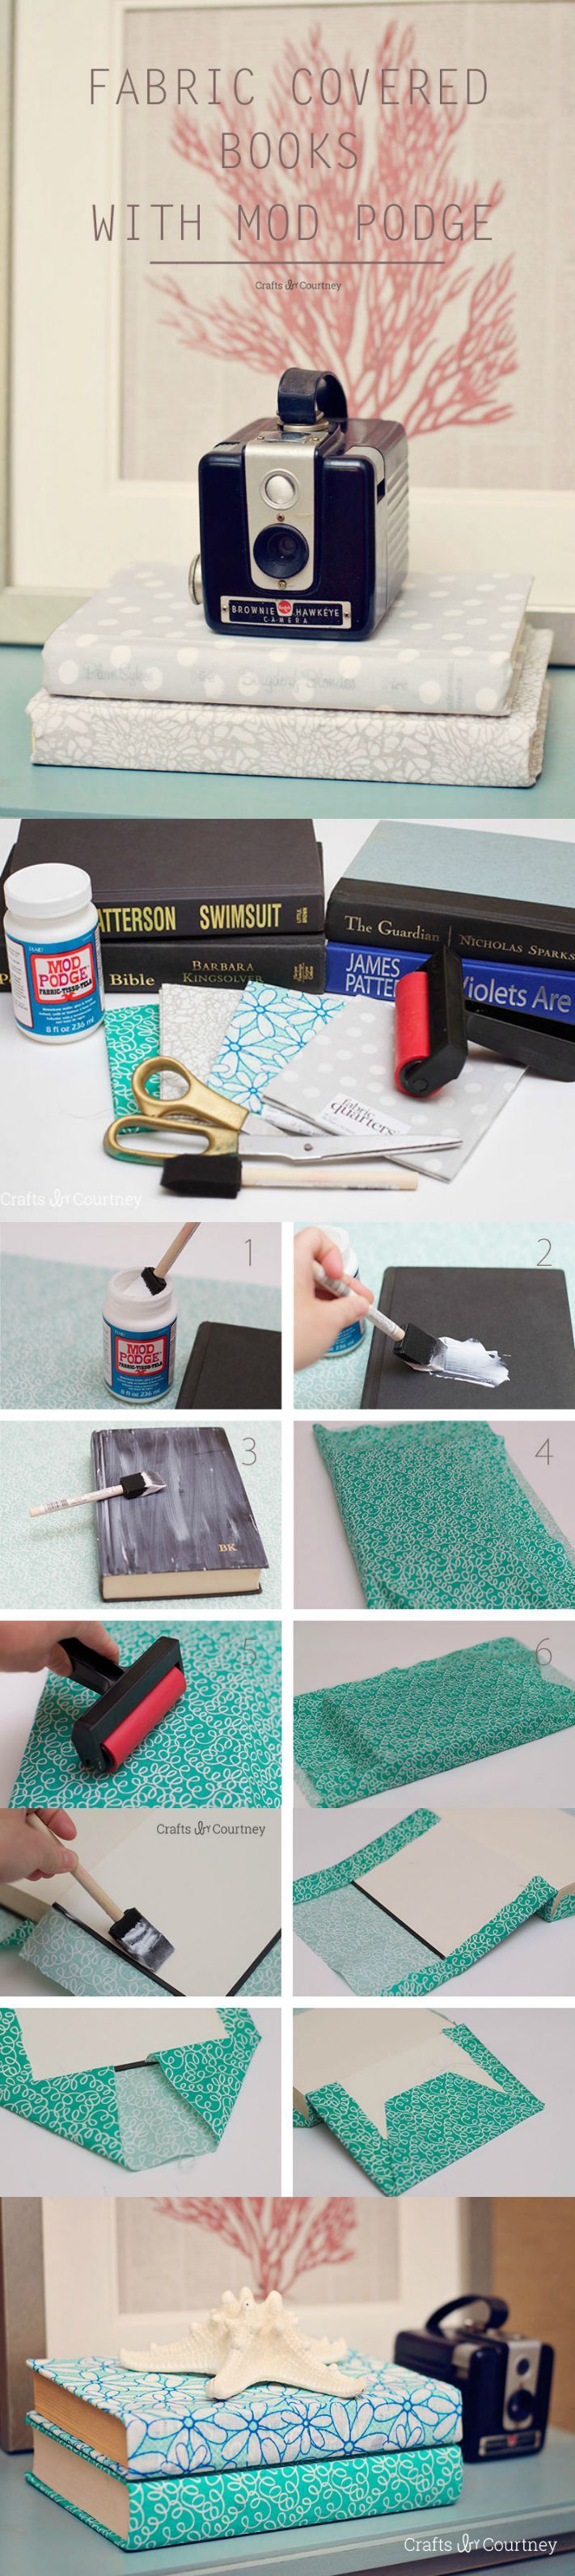 Fabric Covered Books with Mod Podge